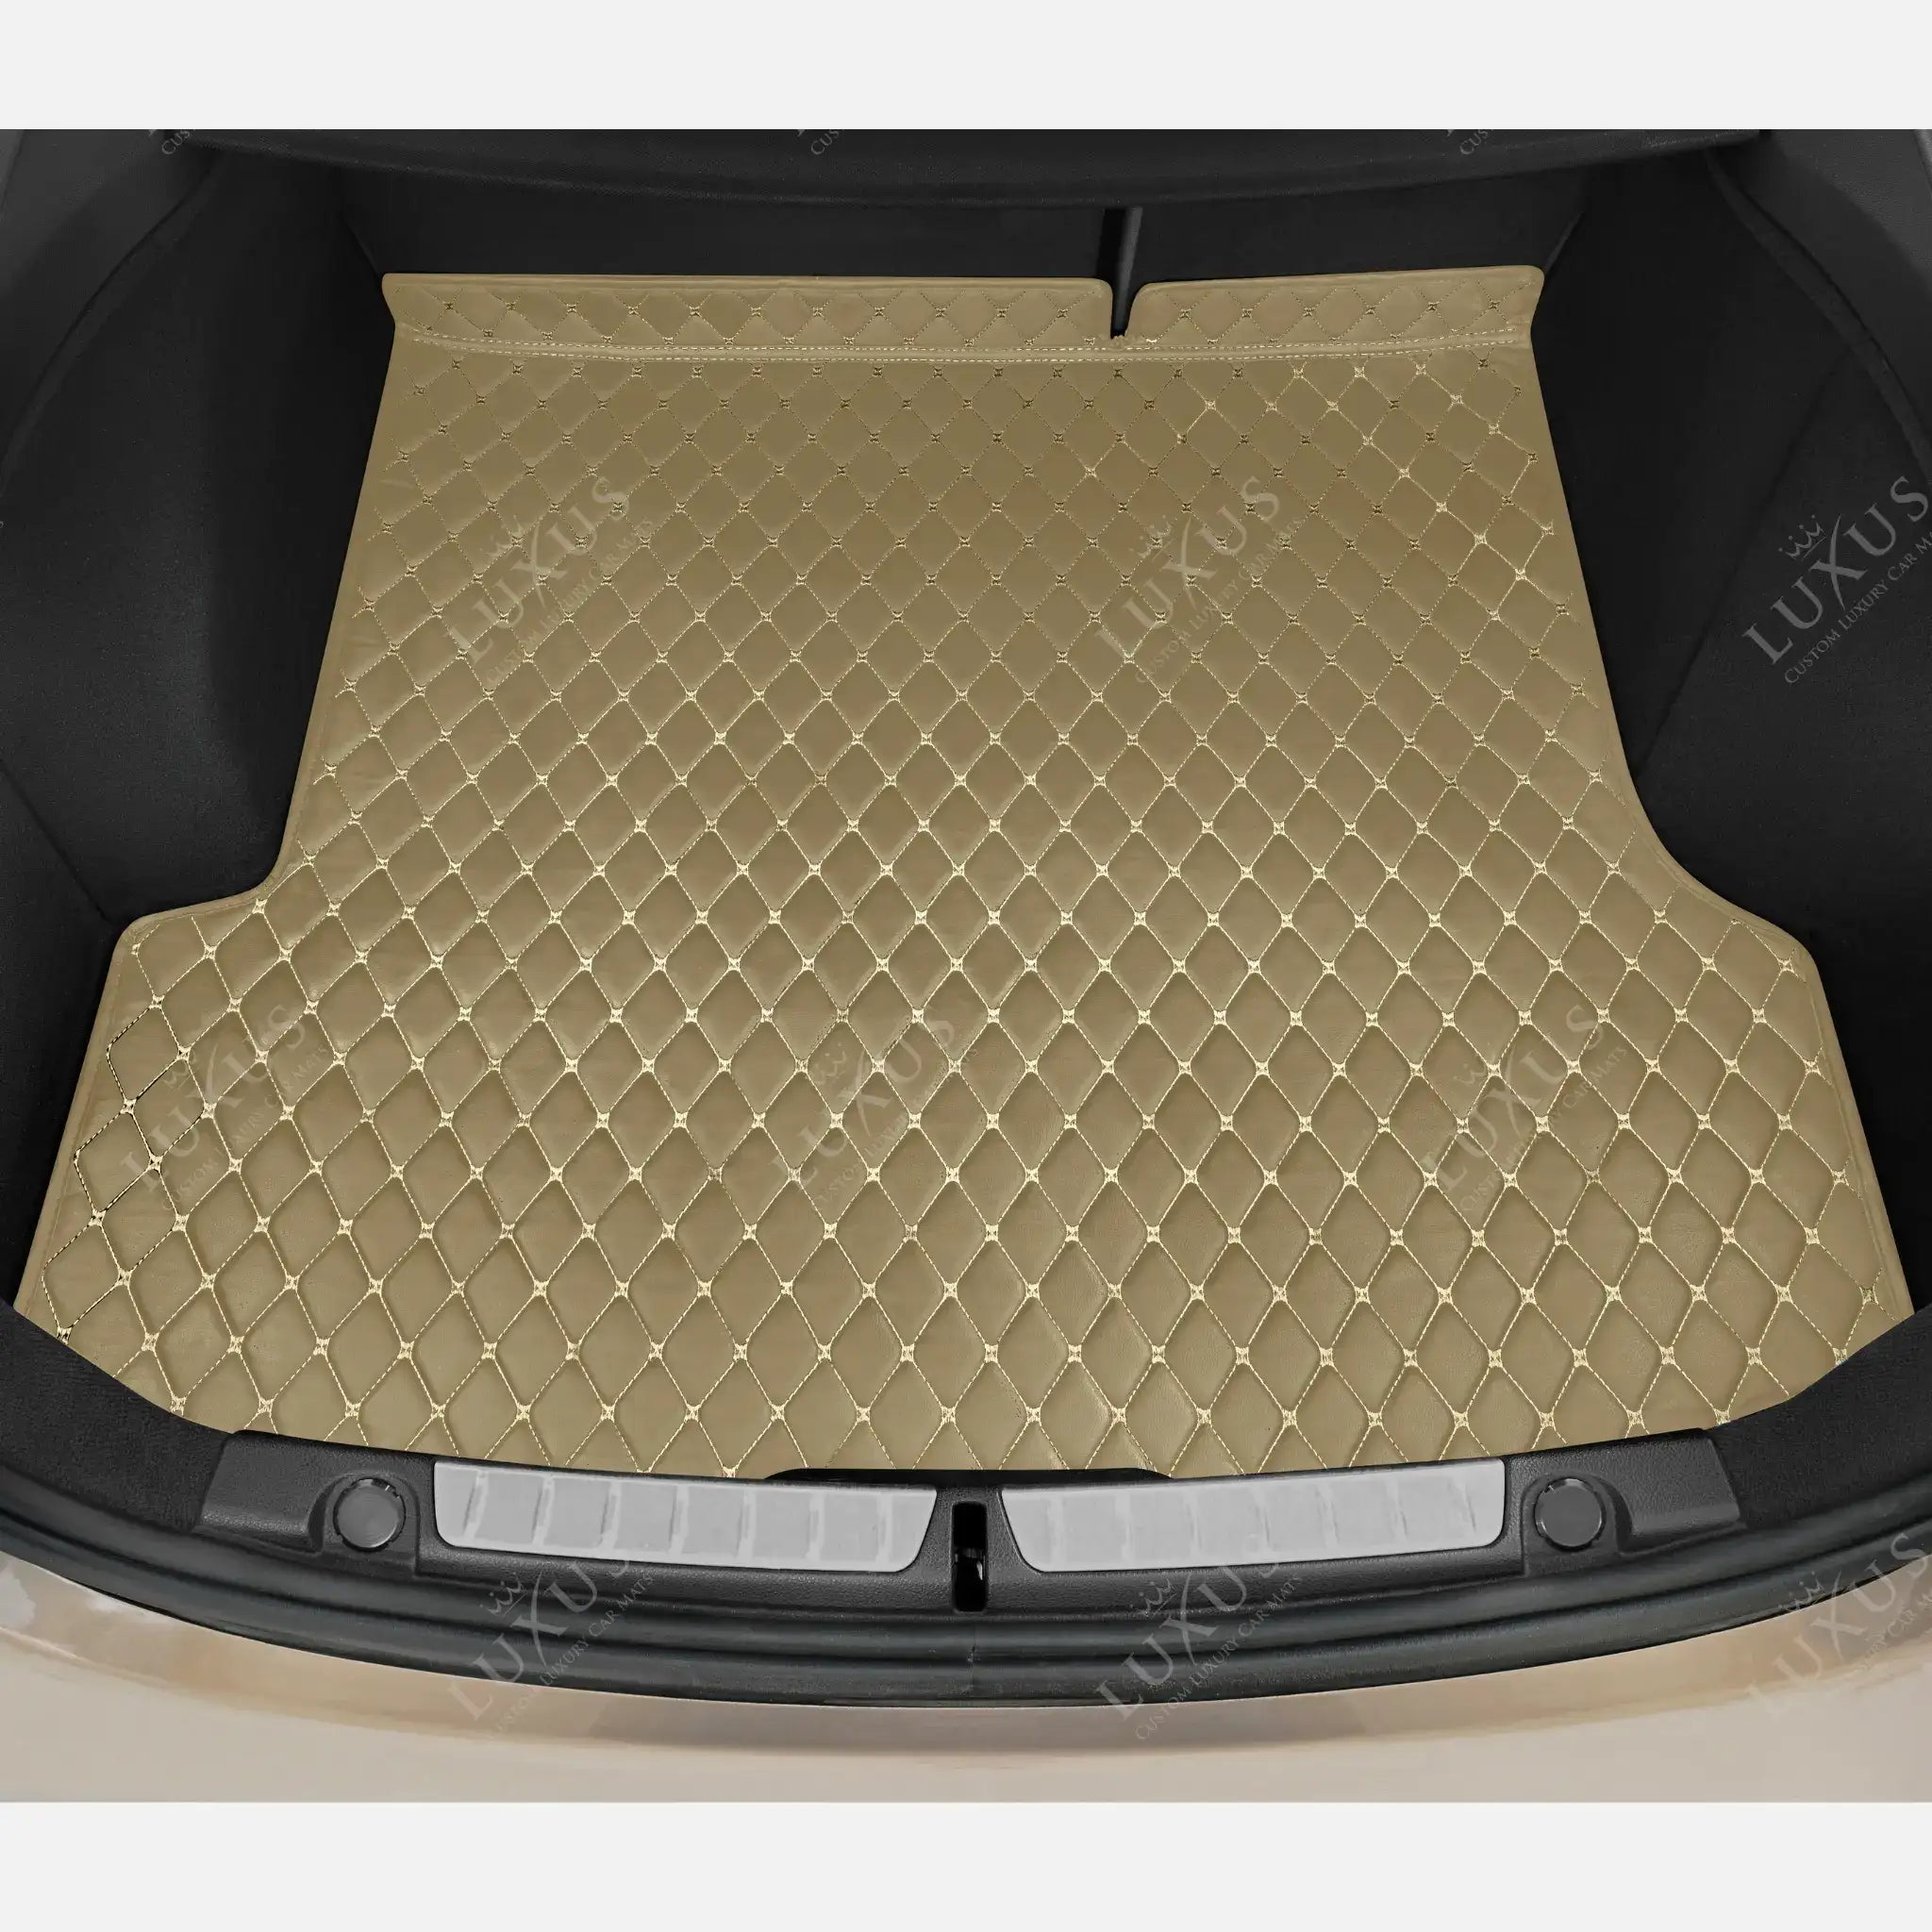 Luxus Car Mats™ - Creme Beige Luxury Leather Boot/Trunk Mat